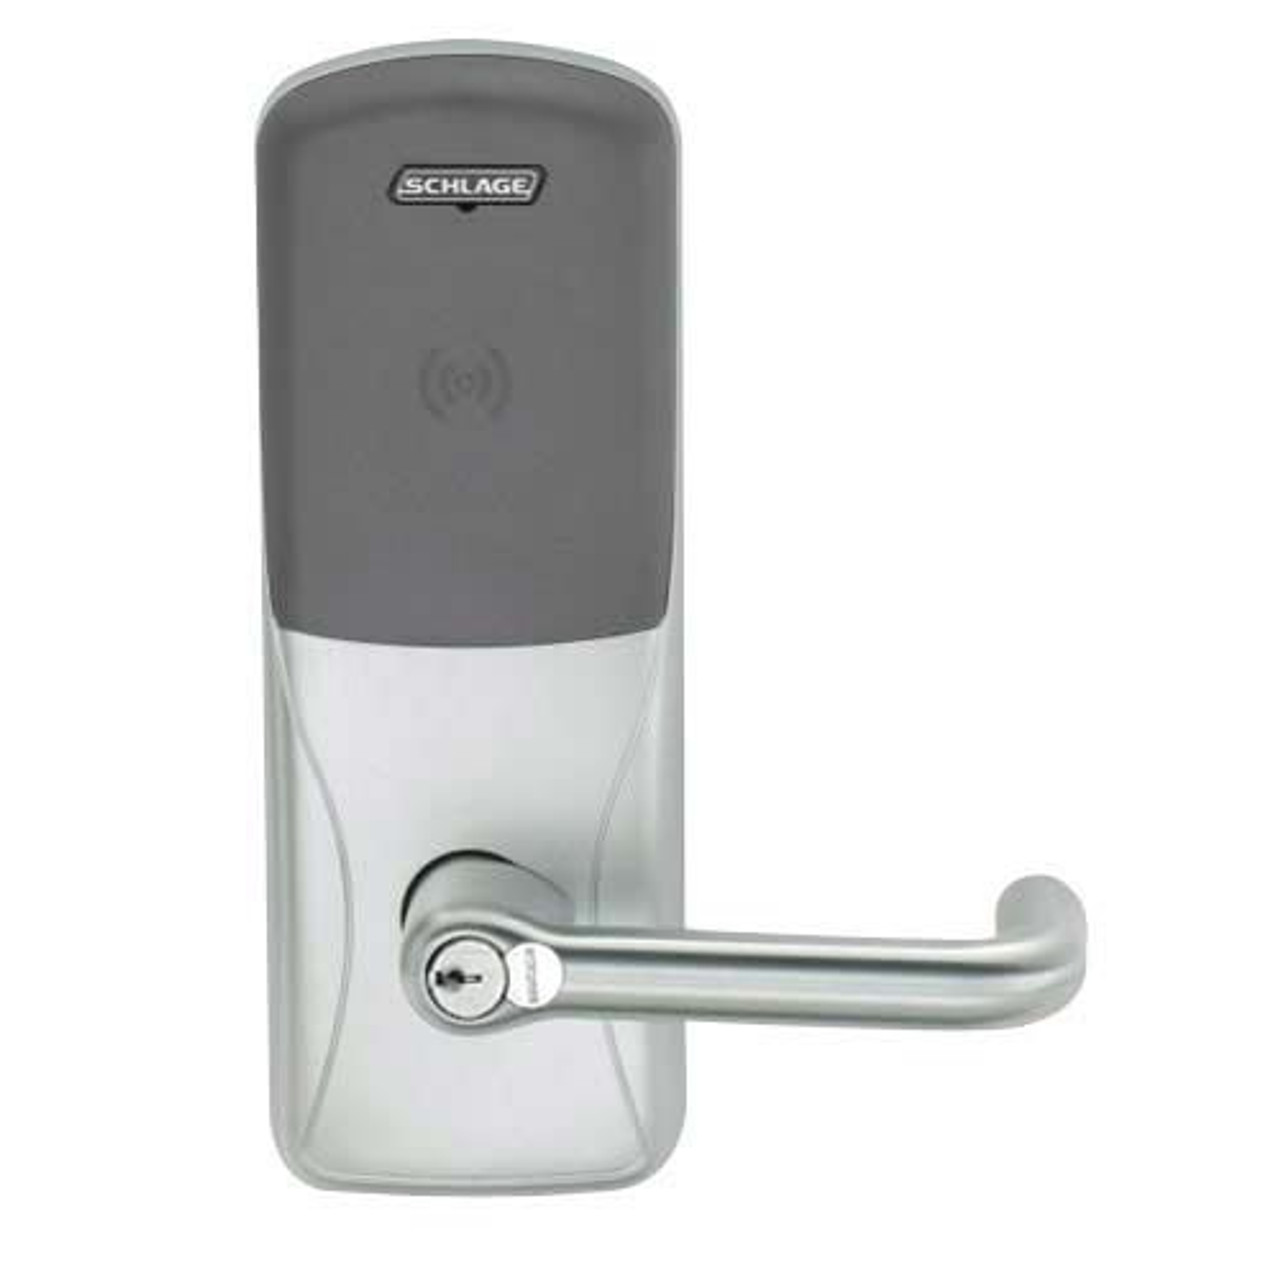 CO200-MD-40-PR-TLR-GD-29R-619 Mortise Deadbolt Standalone Electronic Proximity Locks in Satin Nickel